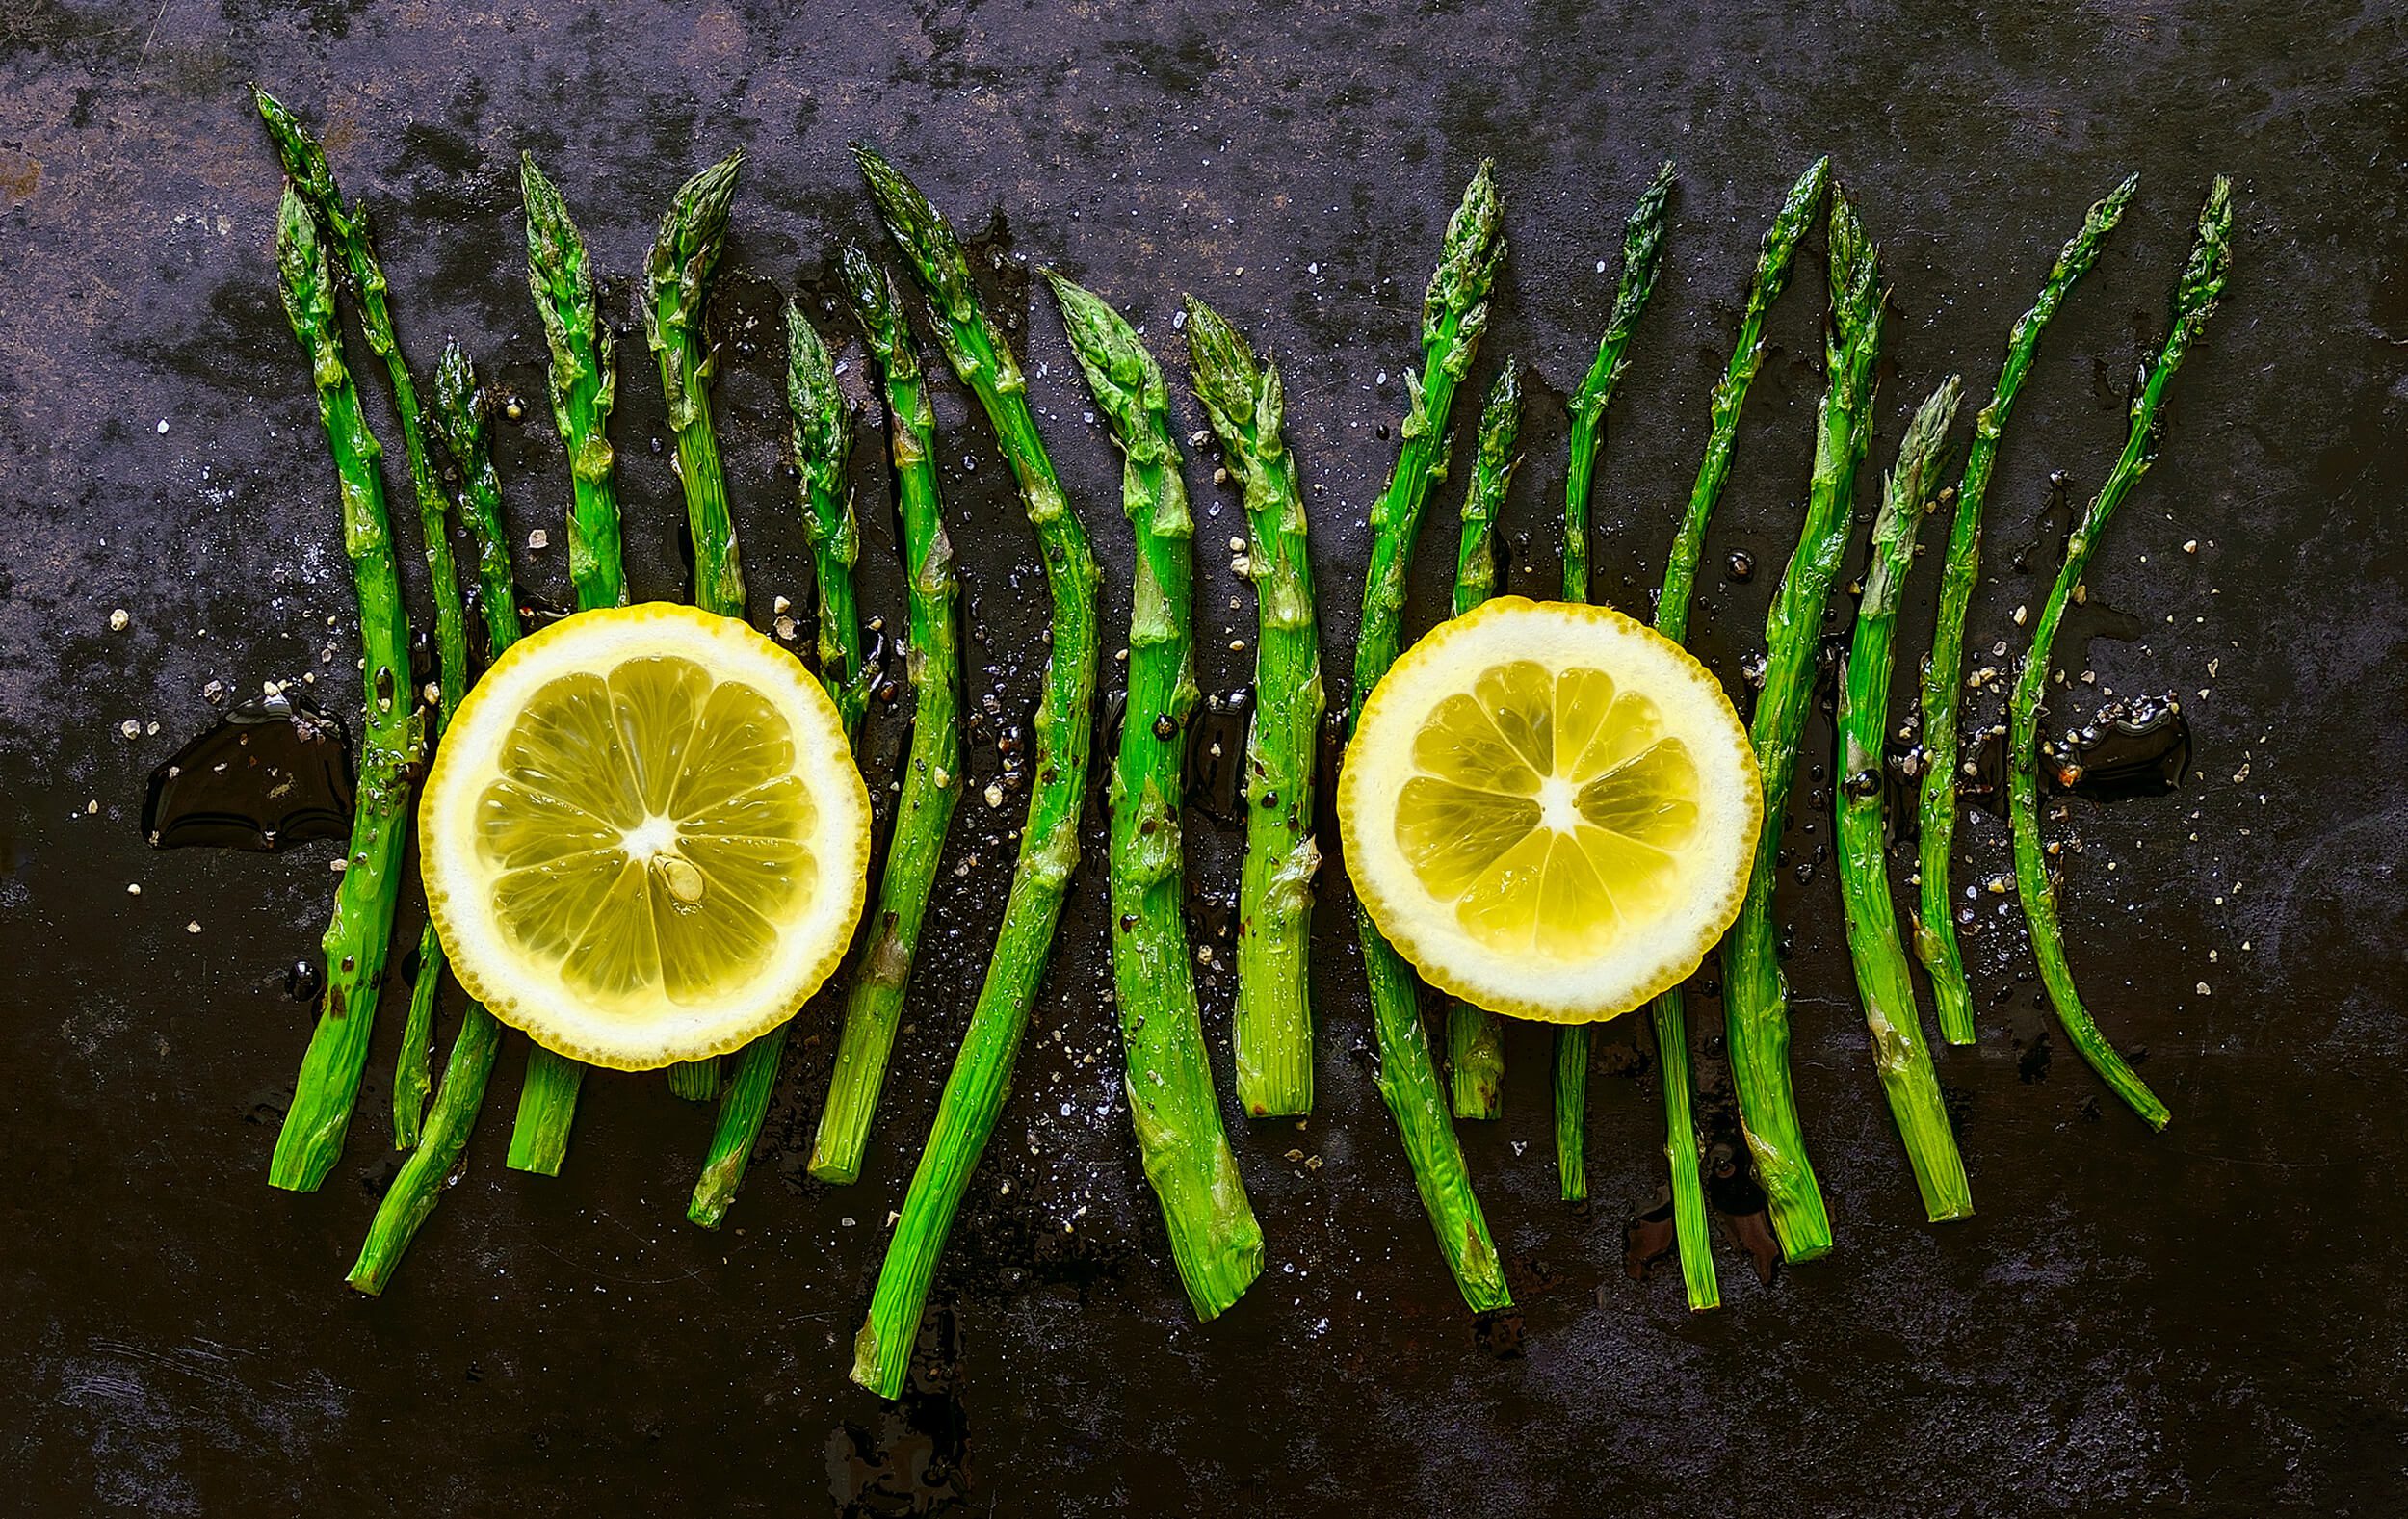 Recipe of the Month: Asparagus with Gremolata